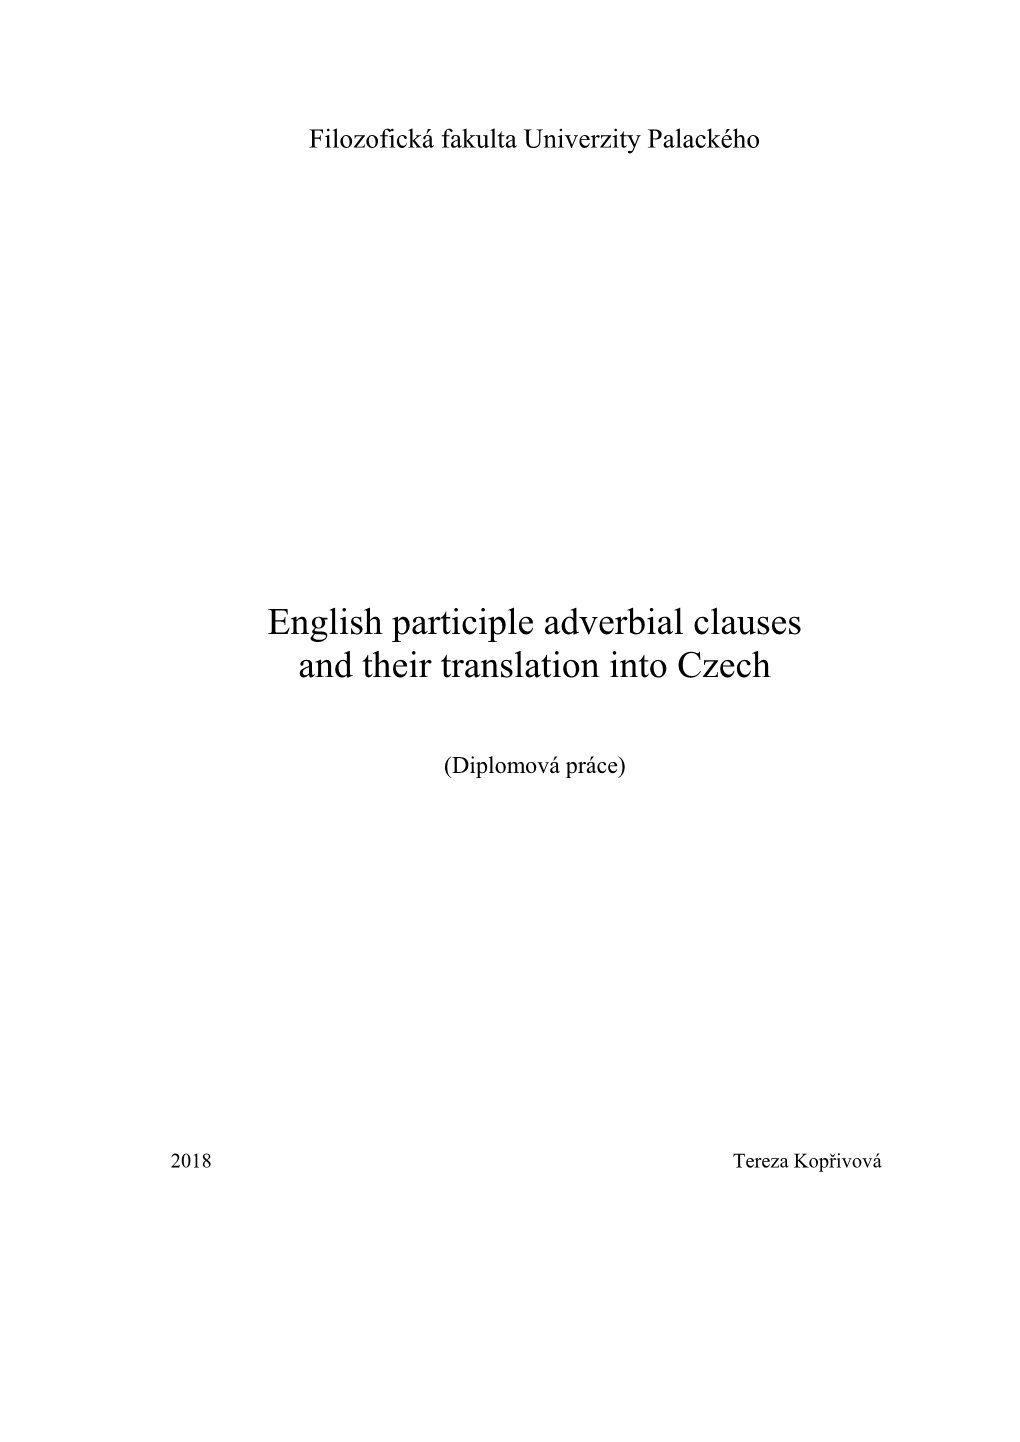 English Participle Adverbial Clauses and Their Translation Into Czech